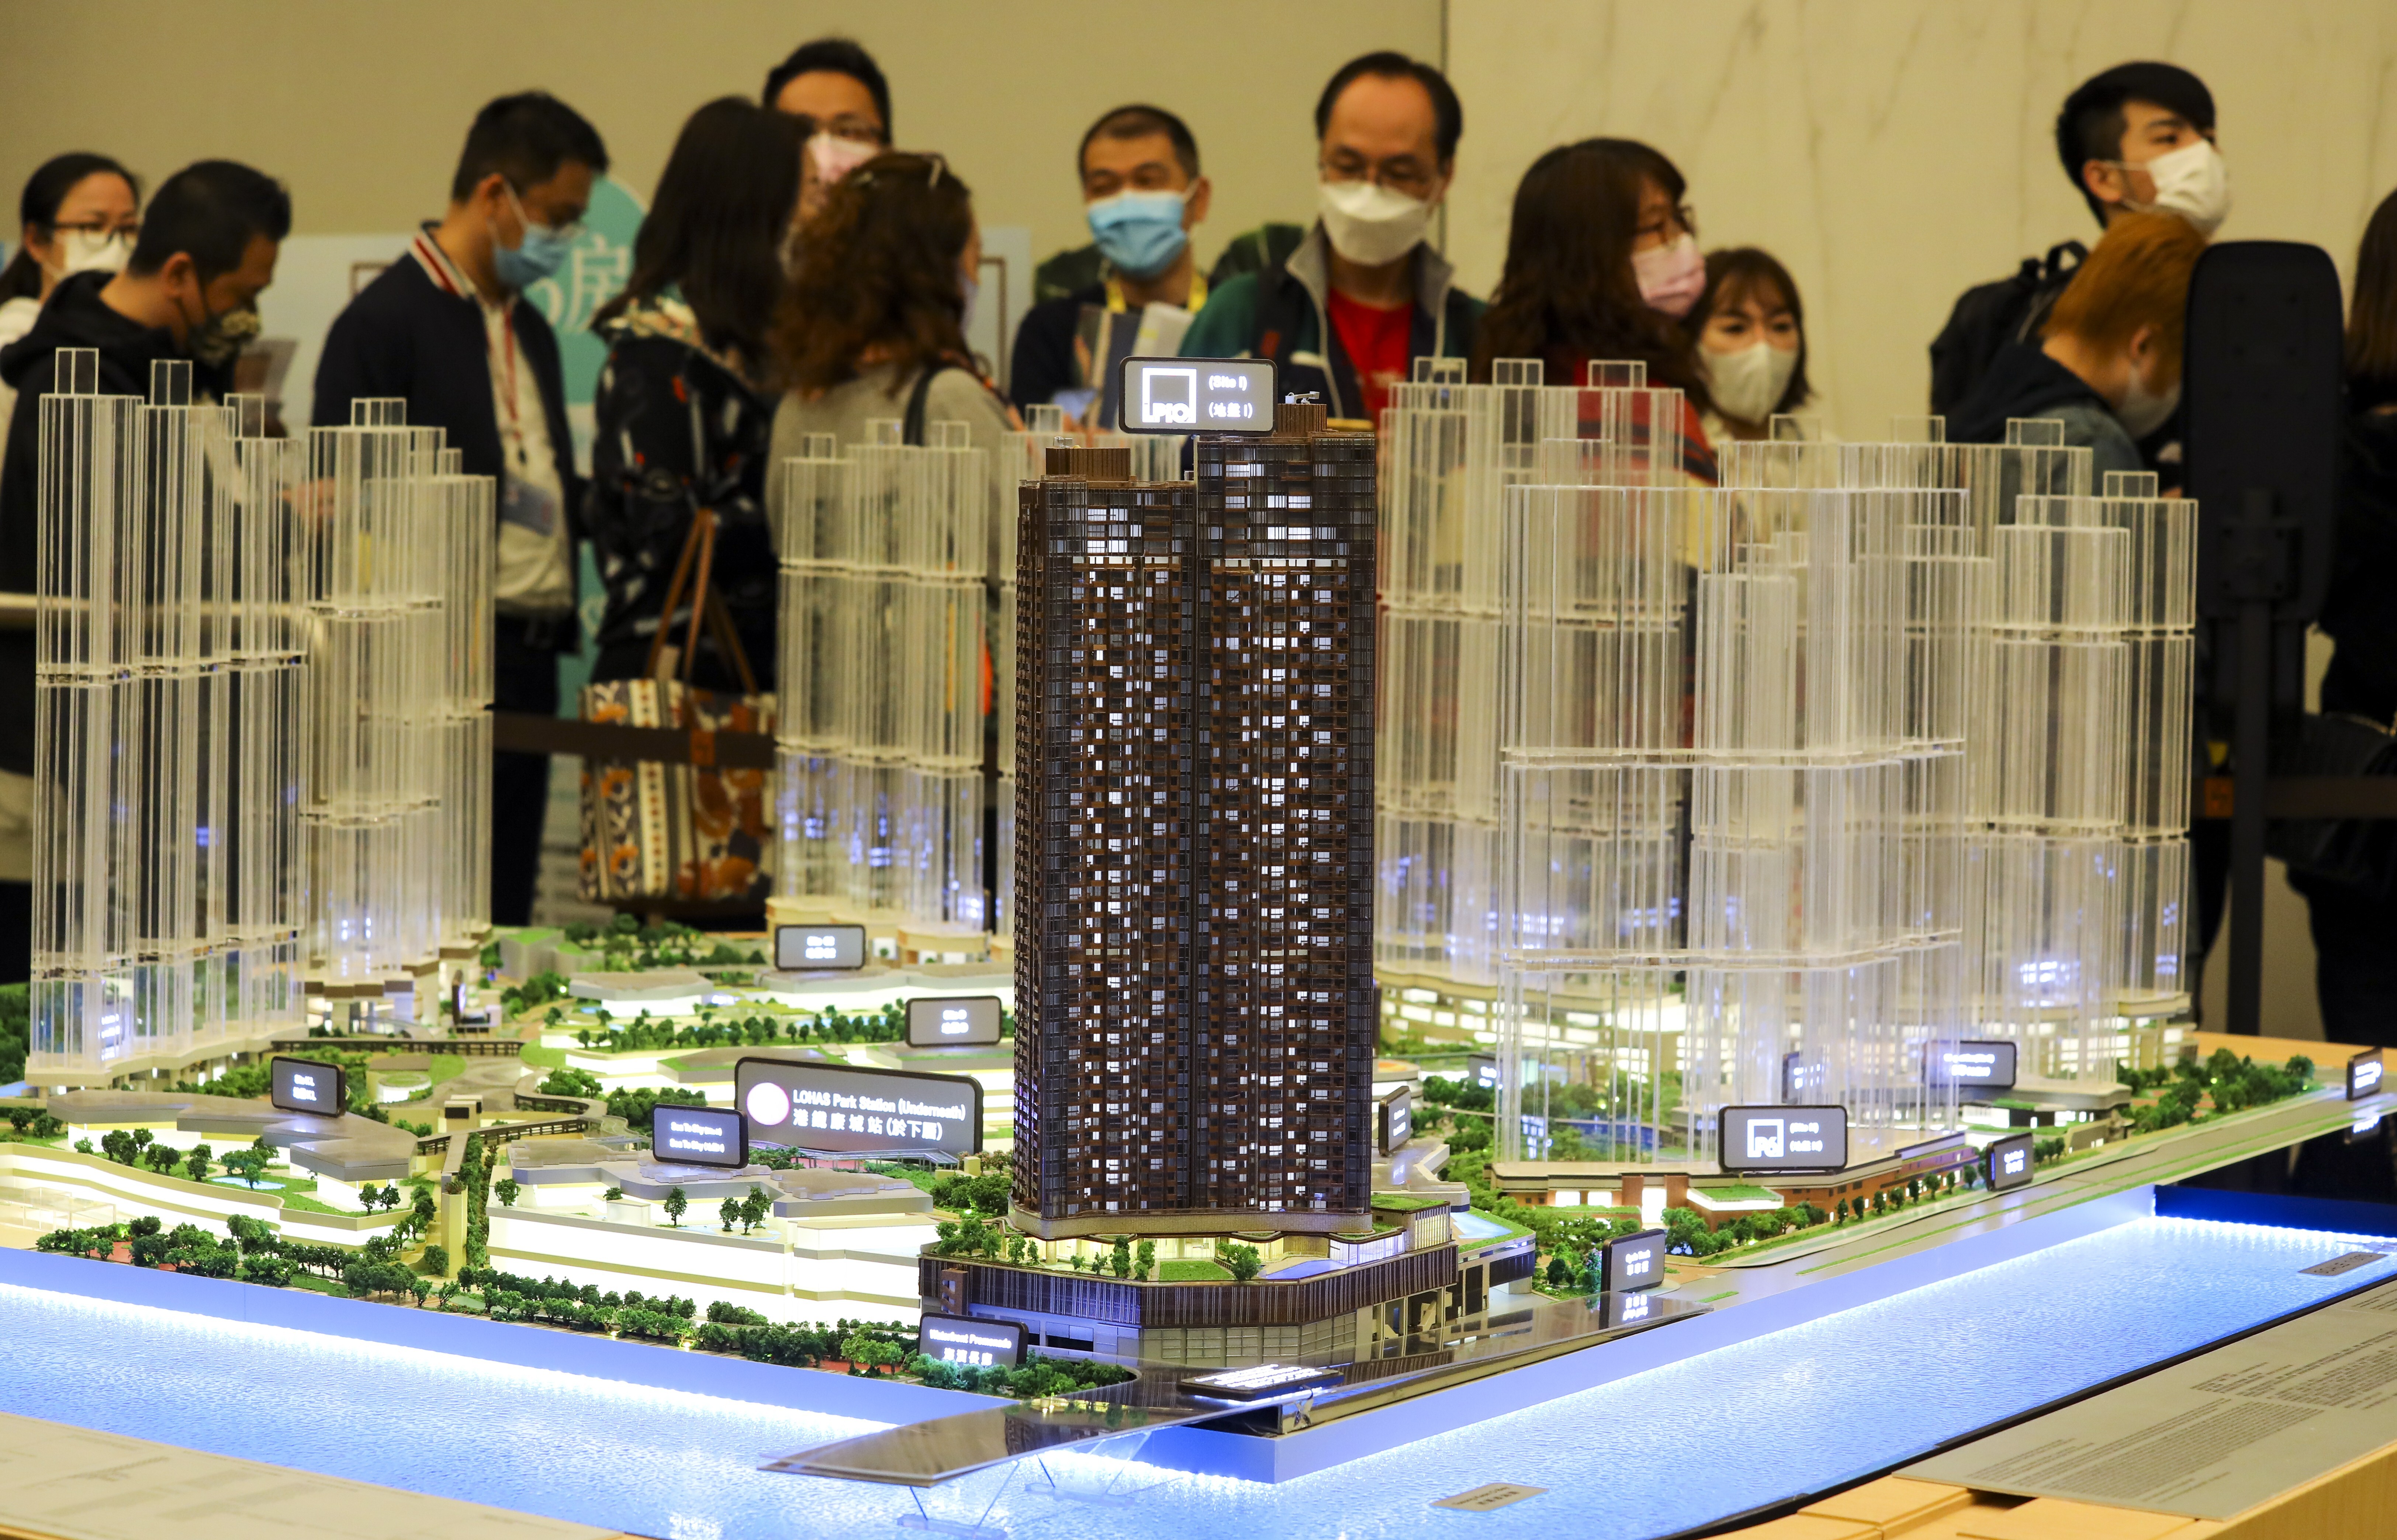 Buyers queuing for Nan Fung Group's LP10 (Lohas Park 10) flats at the developer’s sales office at Harbourside in Kowloon Bay on January 23, 2021. Photo: Dickson Lee